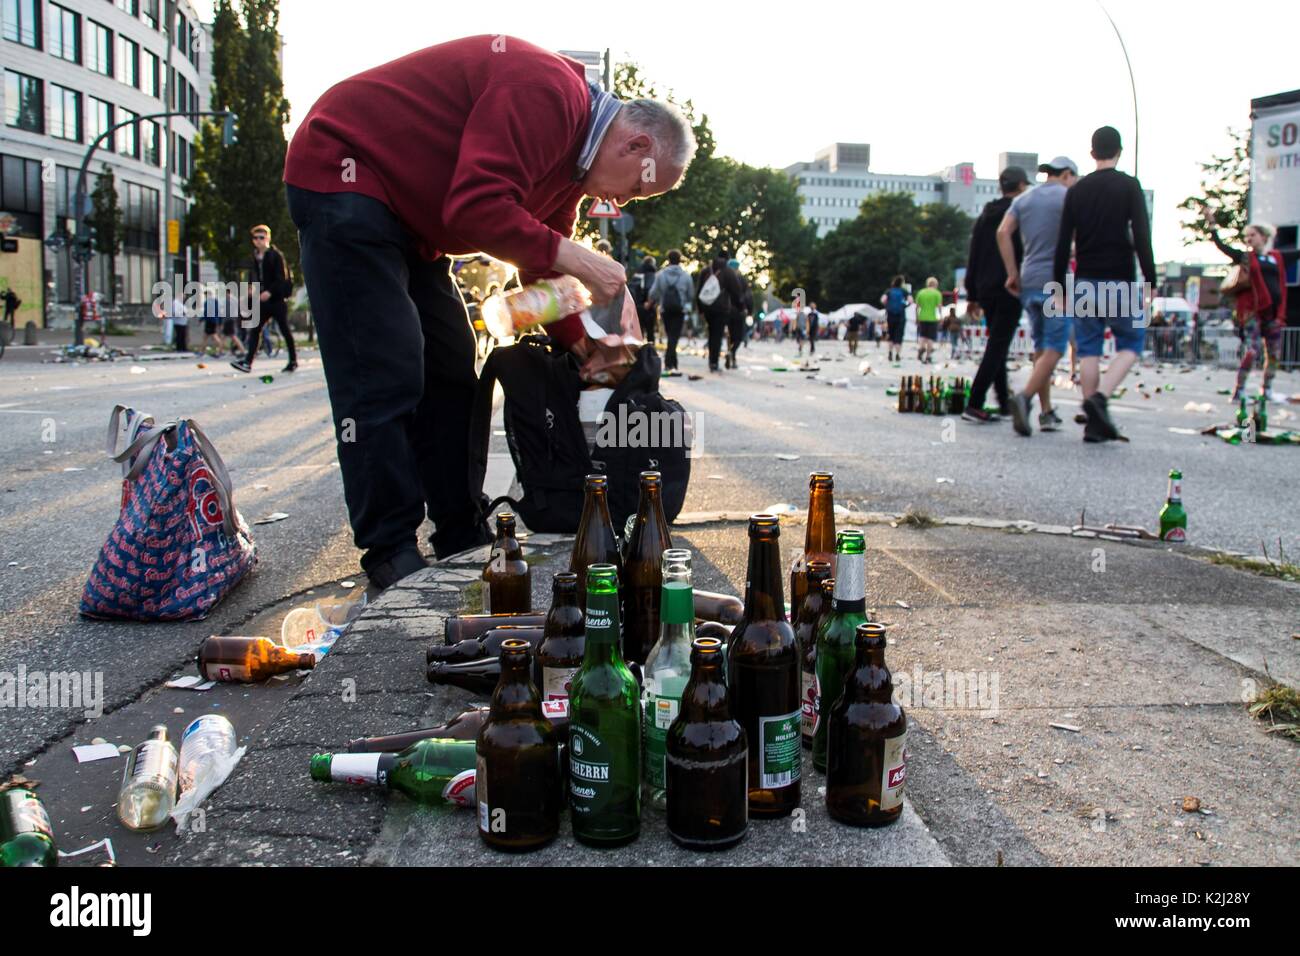 St. Pauli/Hamburg - Germany July 8, 2017: After the last protest ended, people & police gathered near Sternchanze waiting  for new roits. Stock Photo